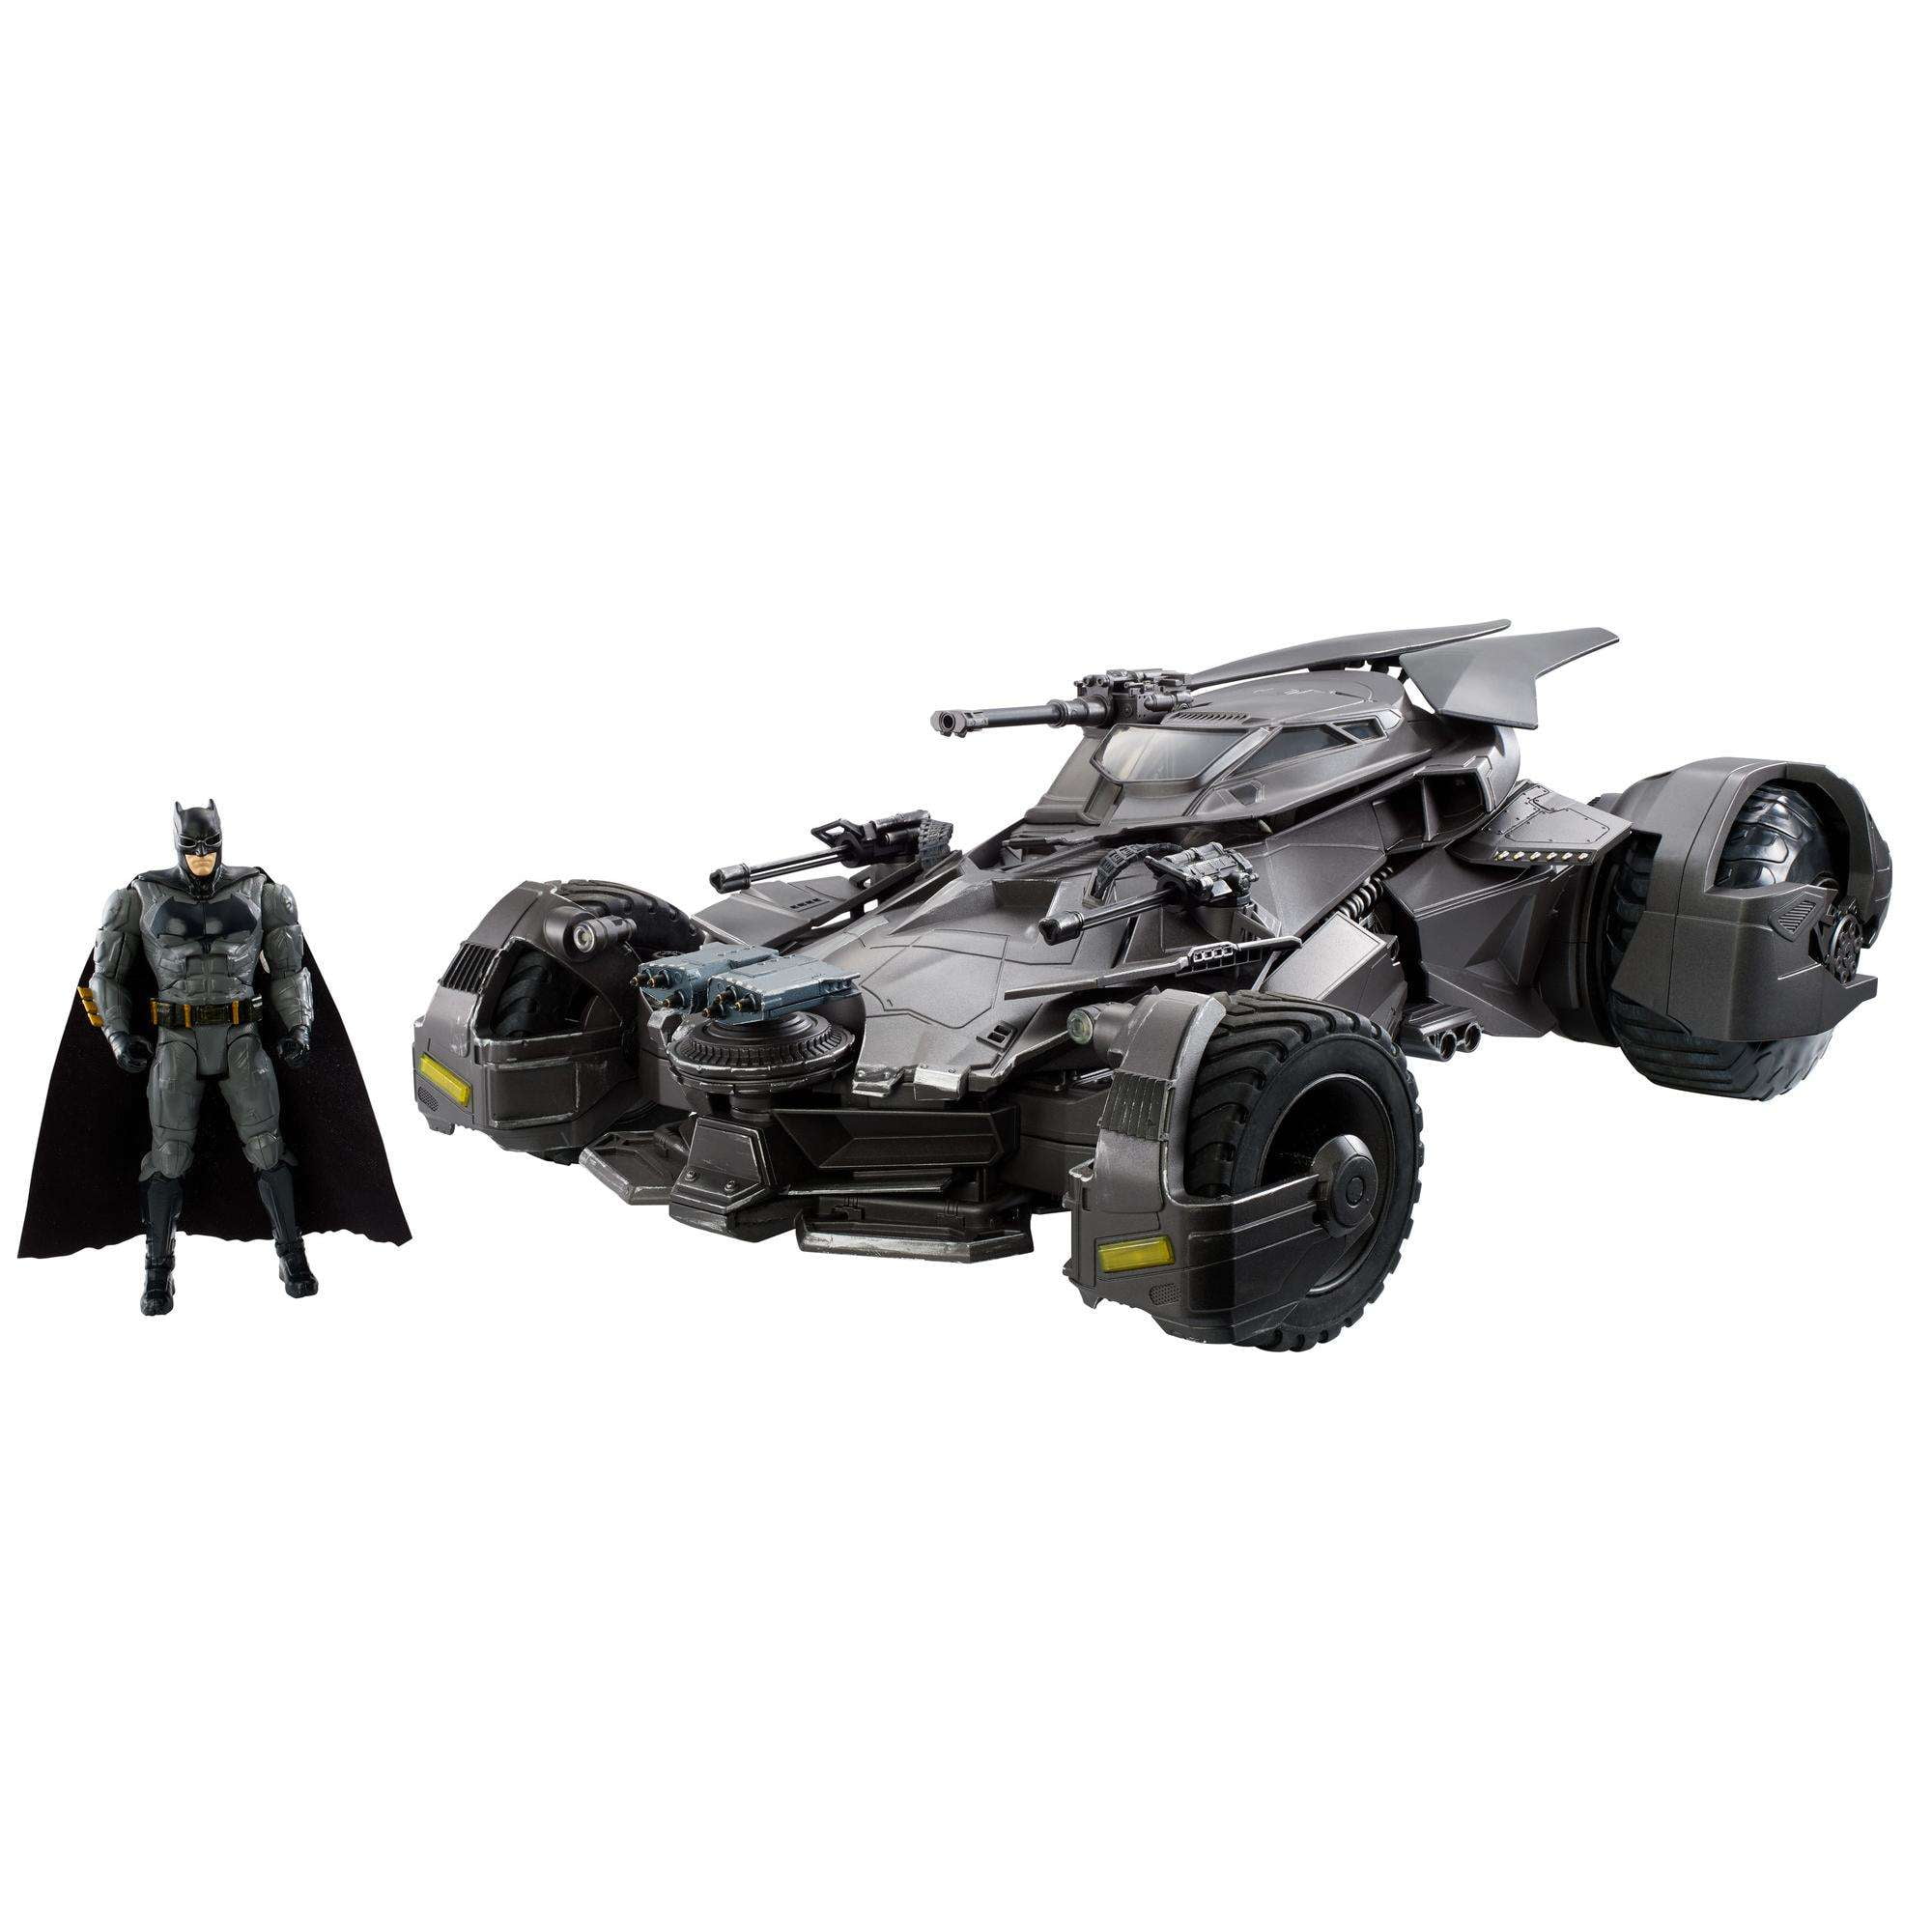 DC Justice League Ultimate Batmobile Vehicle with 6-Inch Figure 